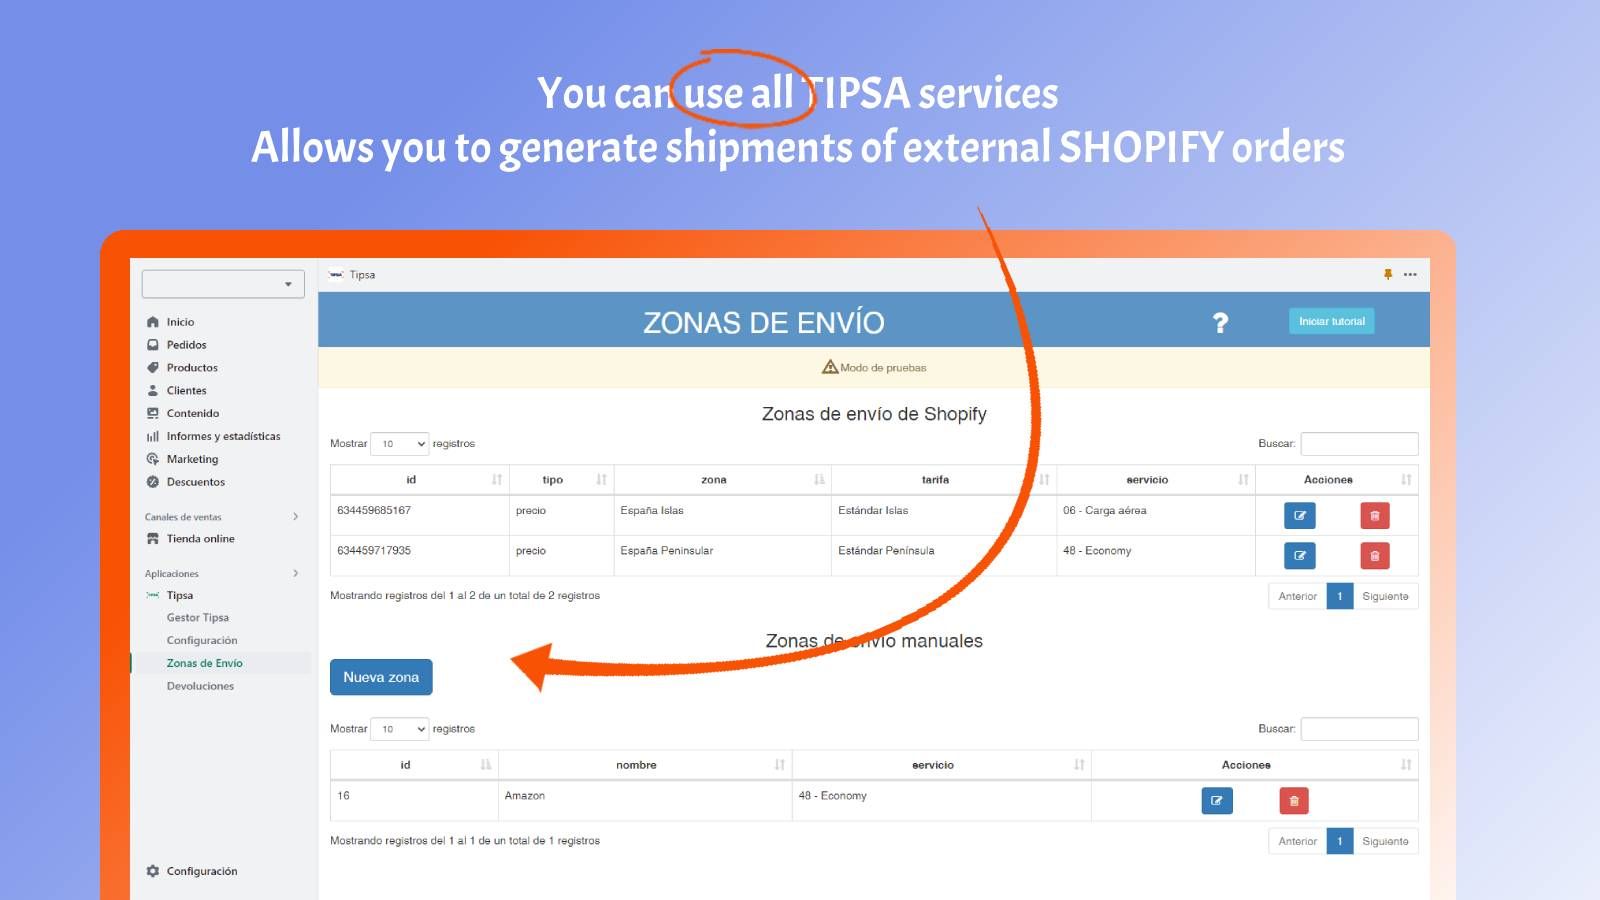 All TIPSA services. Generate external order shipments